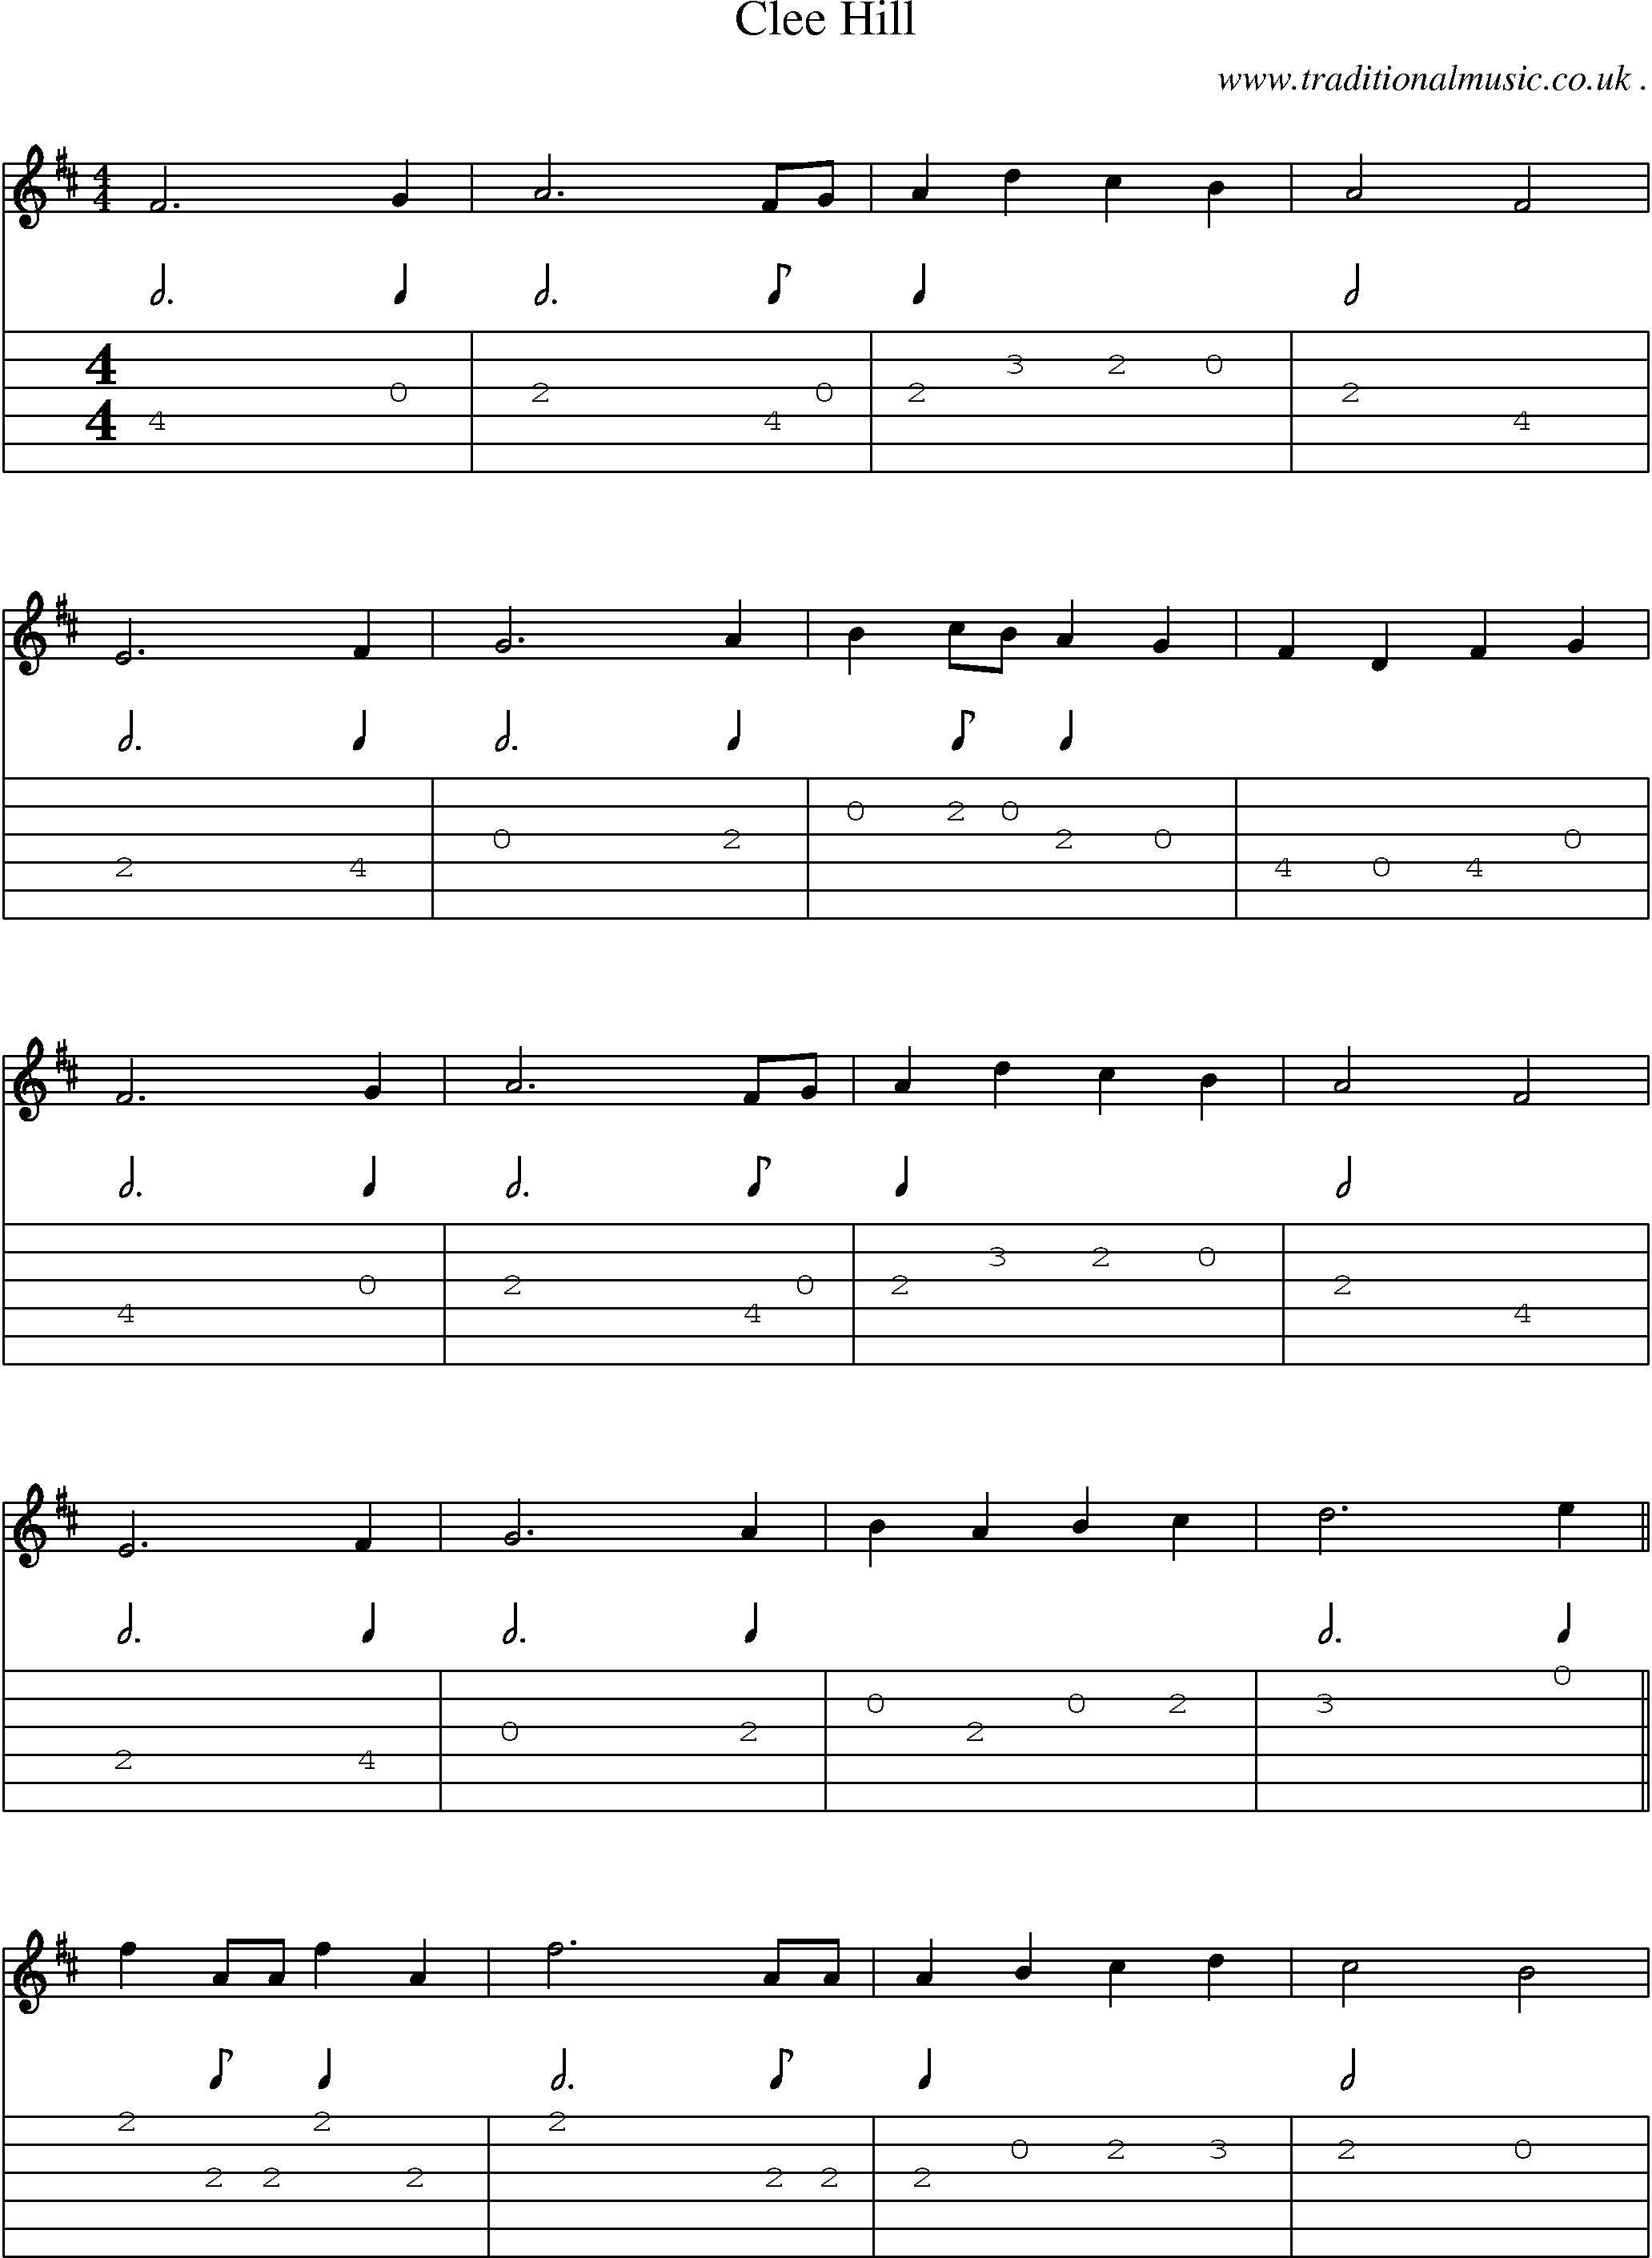 Sheet-Music and Guitar Tabs for Clee Hill